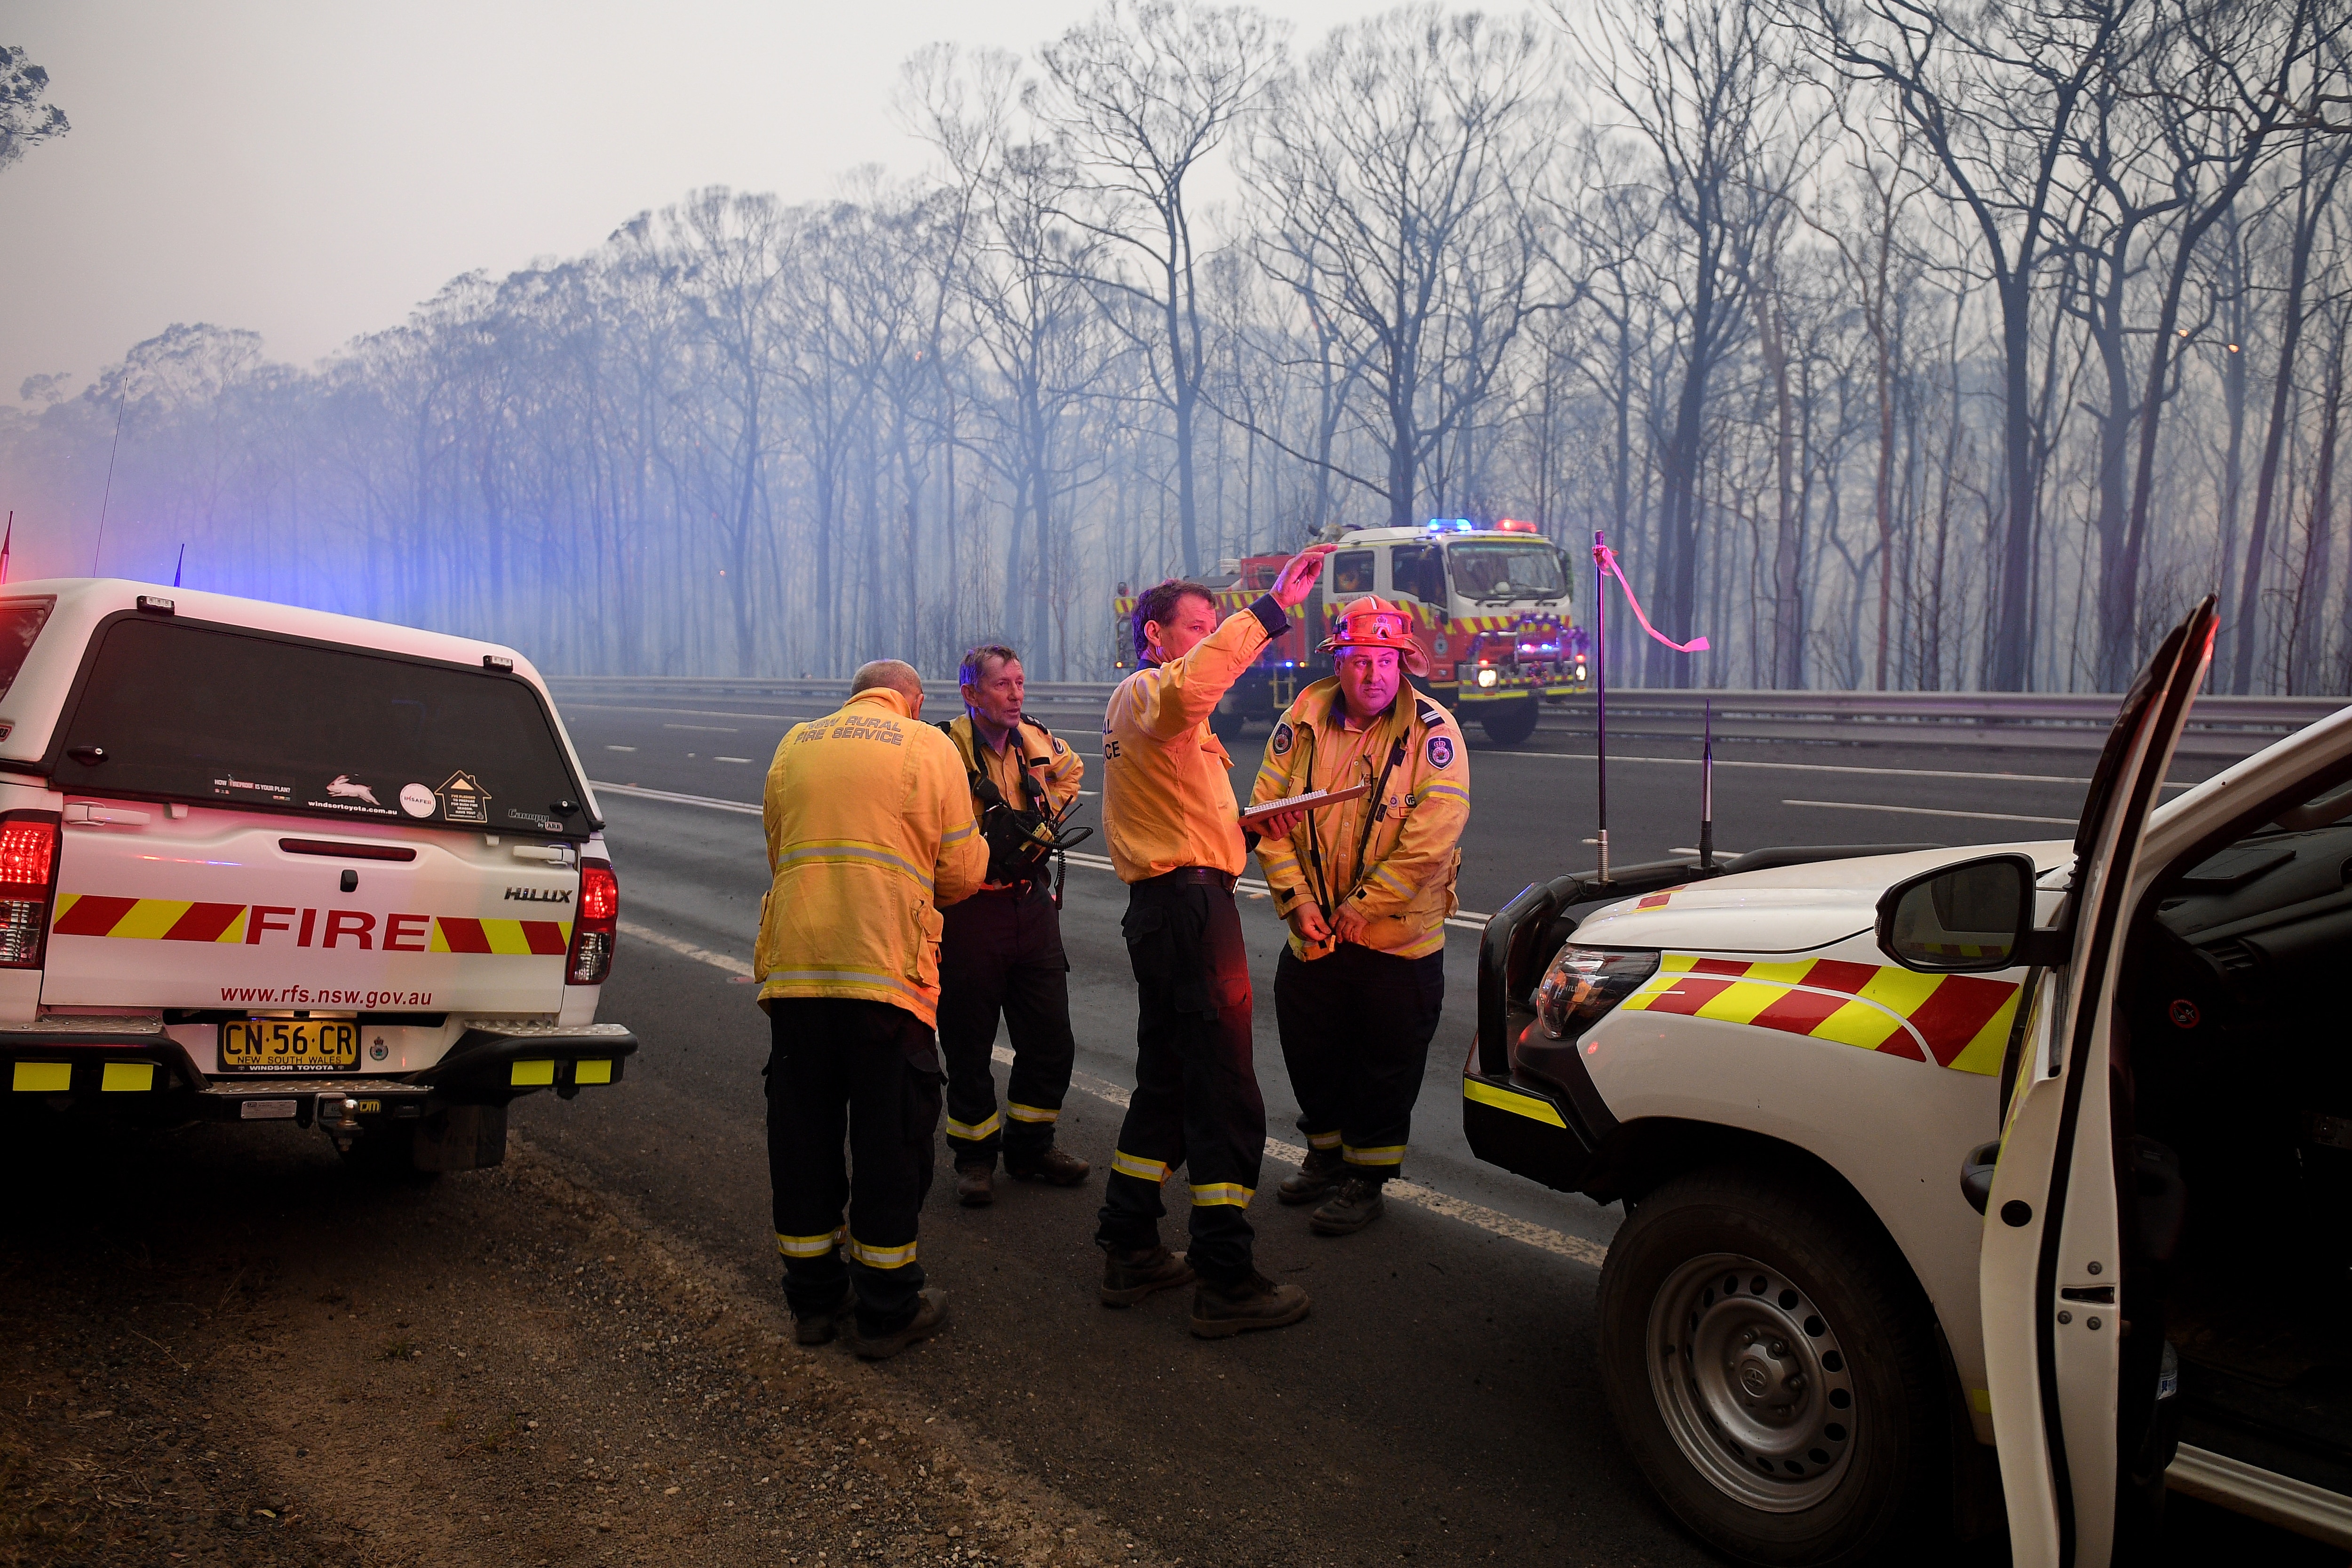 NSW Rural Fire Service Captains discuss plans as The Gospers Mountain Fire impacts Bilpin.